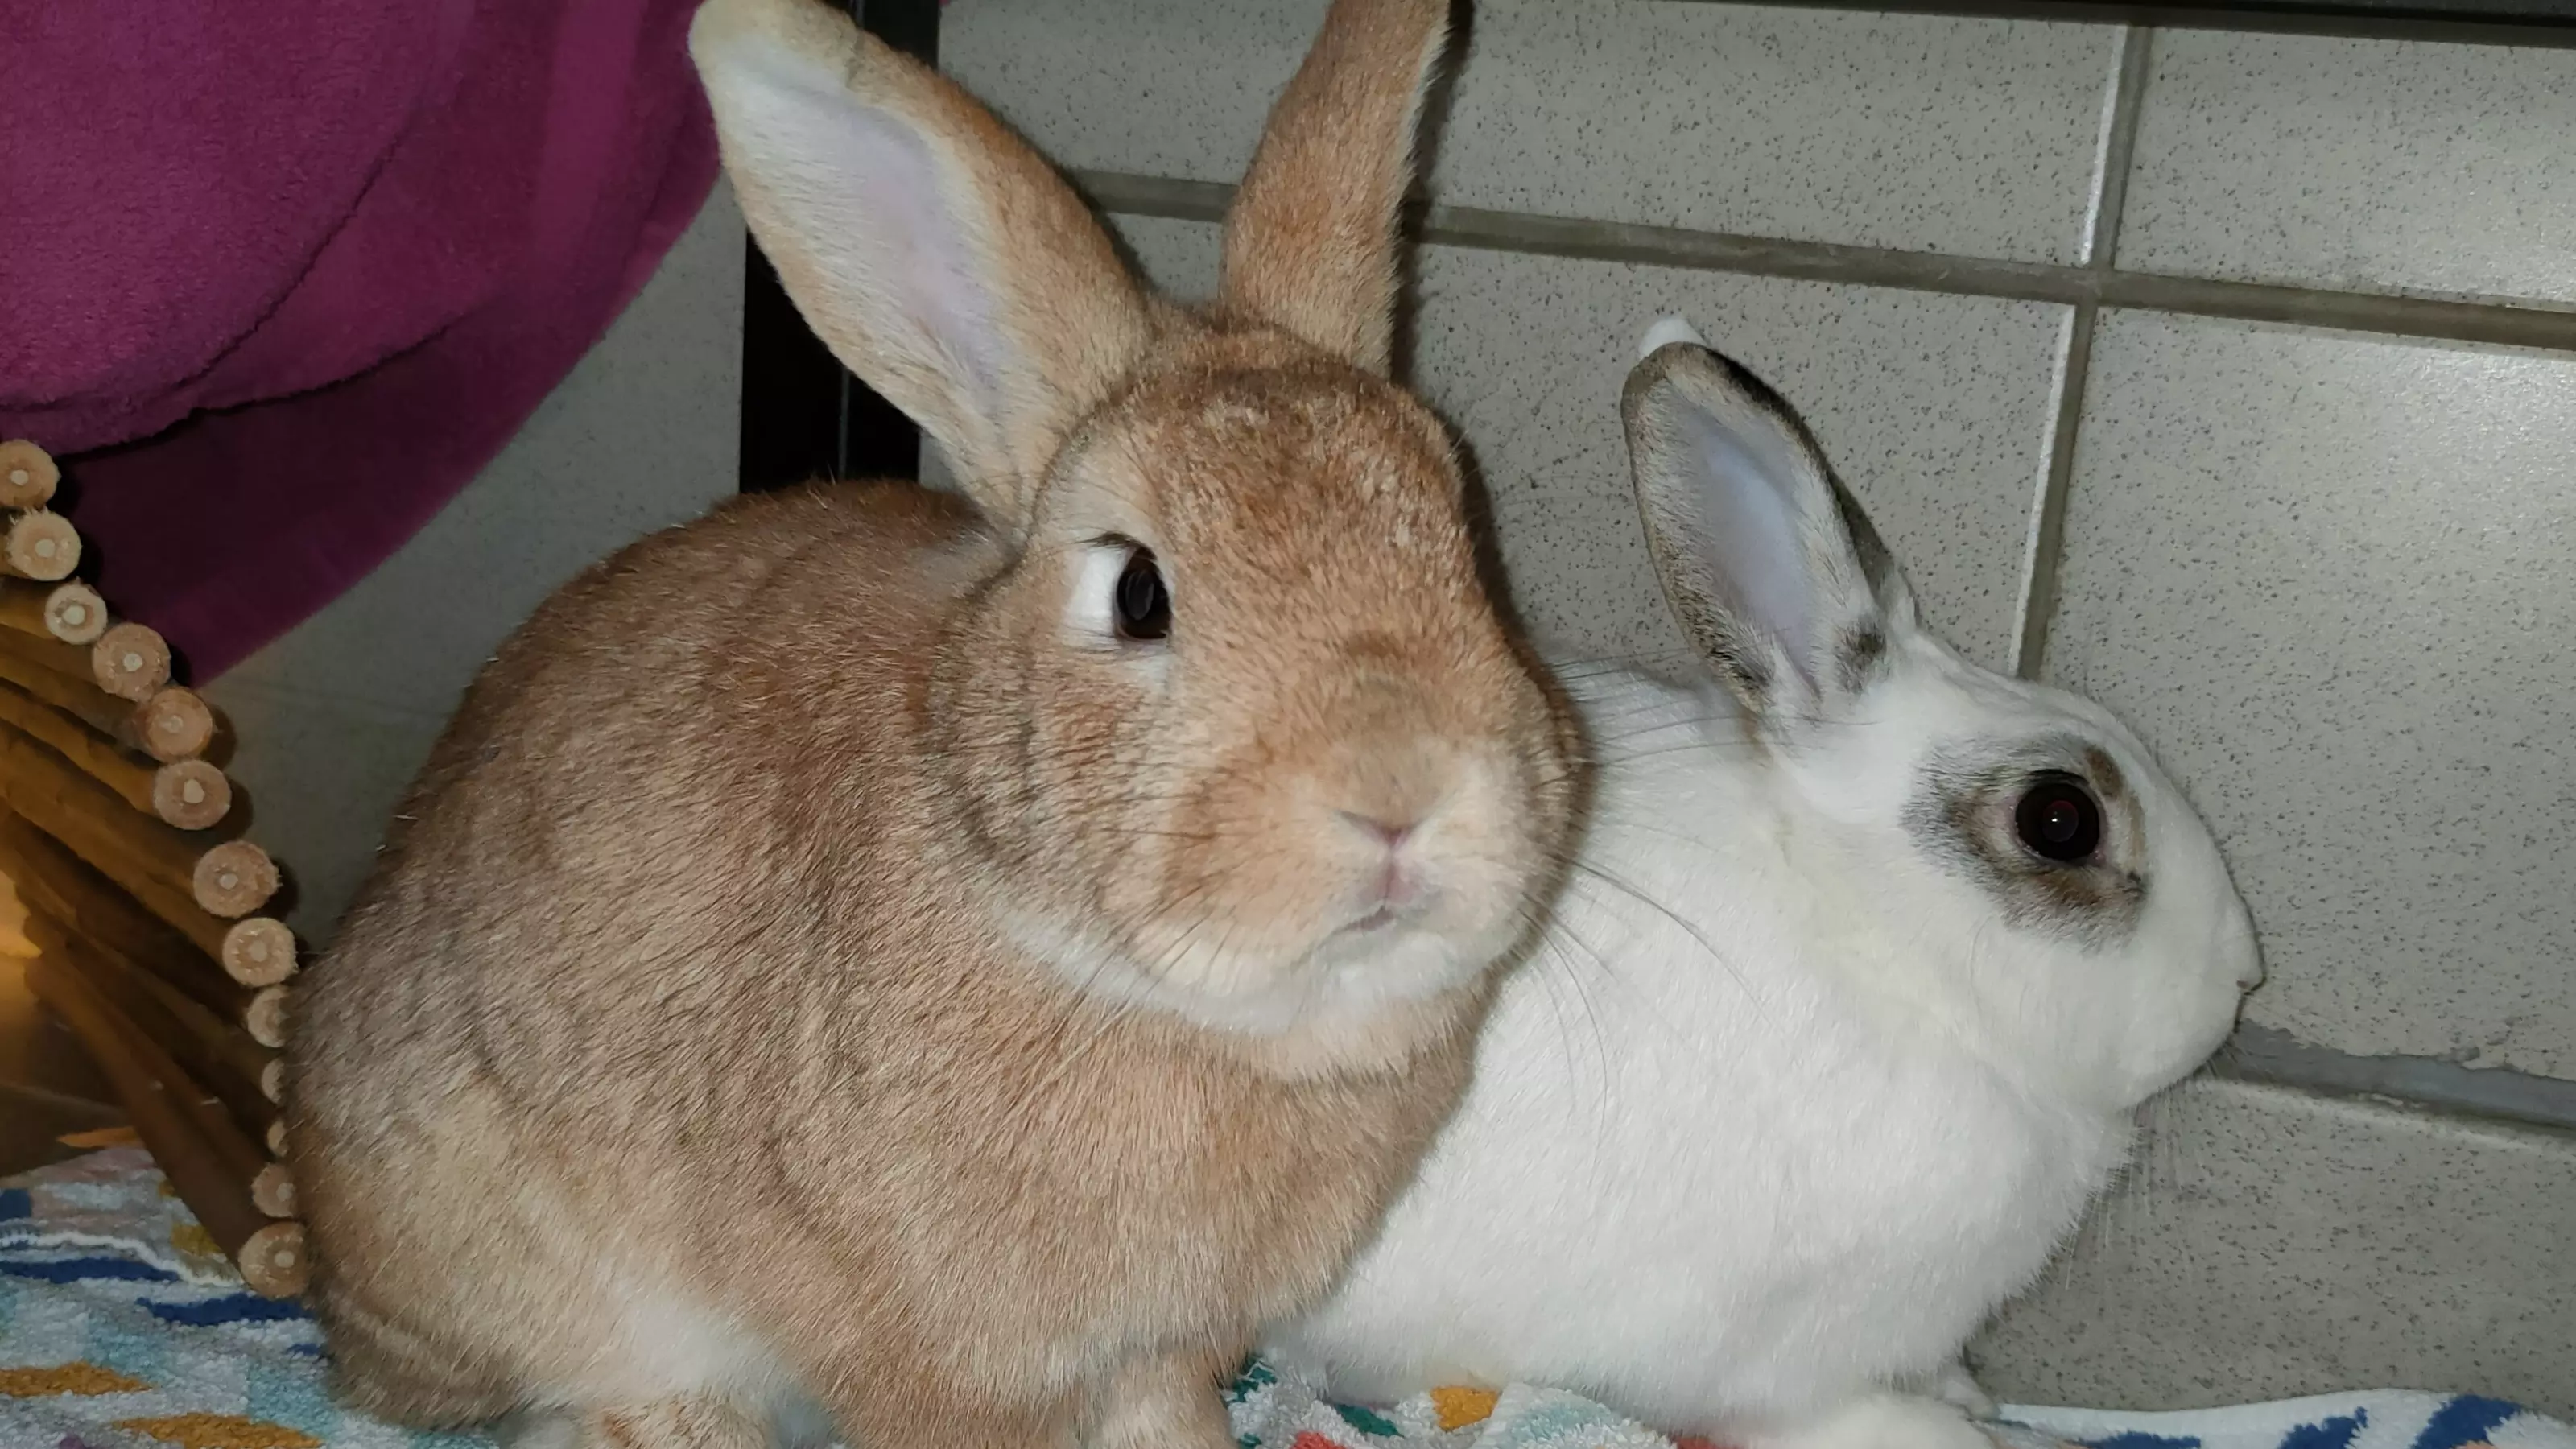 Rabbits Poppet and Bentley sitting beside each other